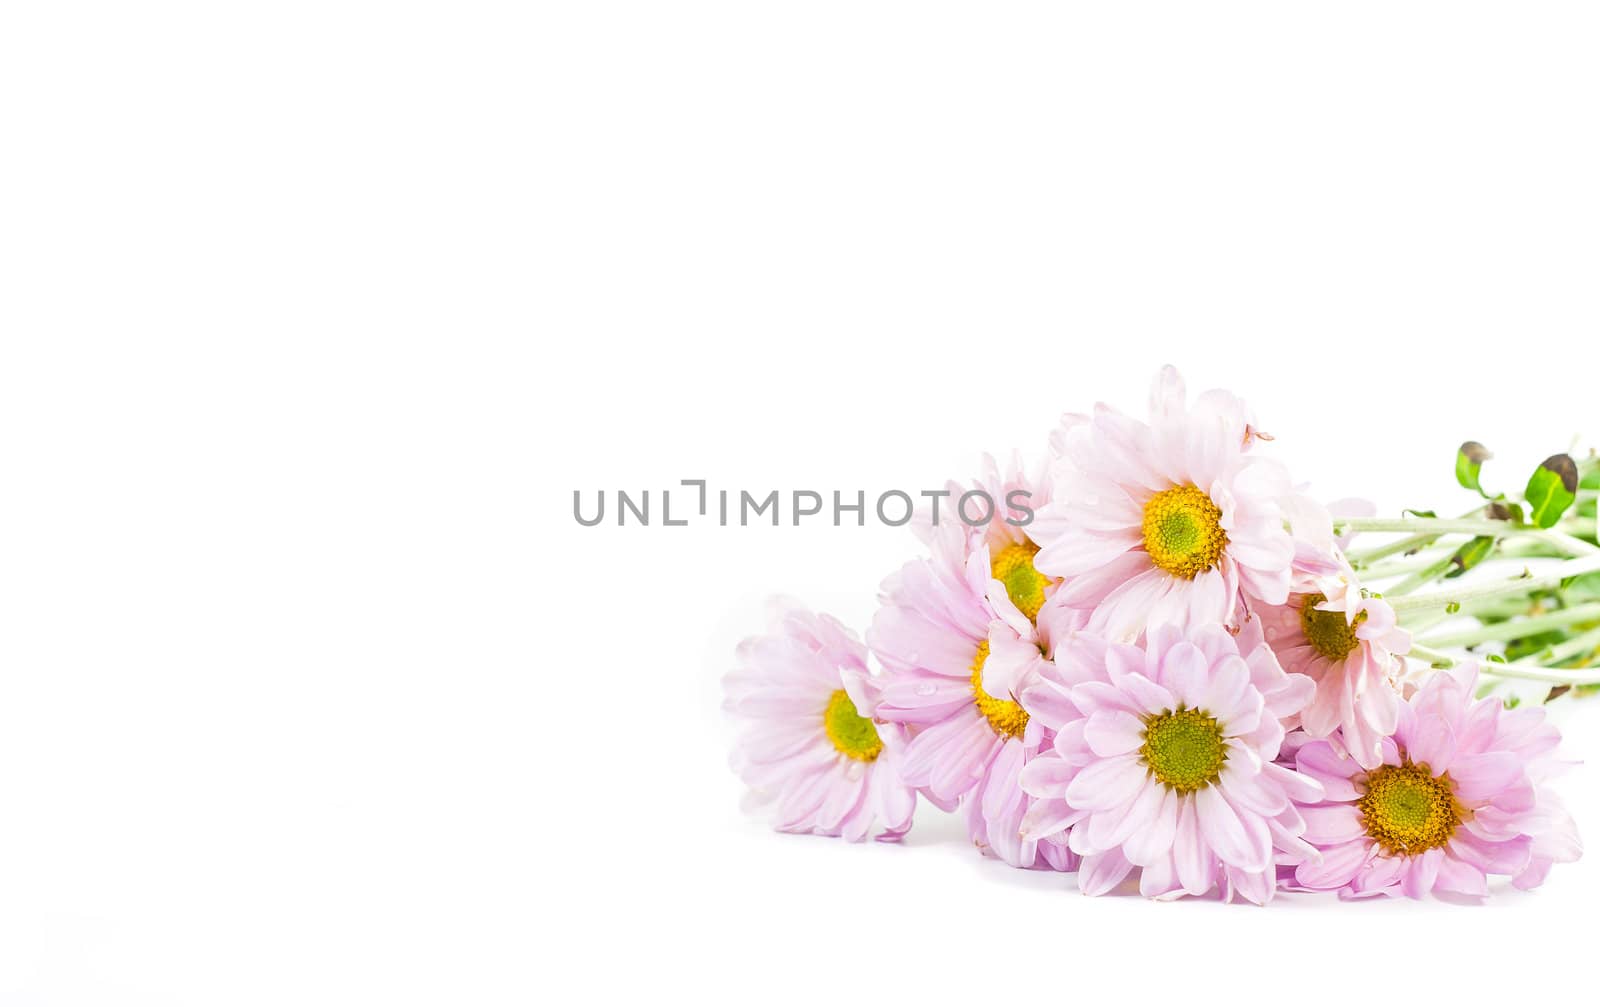 Blue Chrysanthemums flower isolate on white background by moggara12